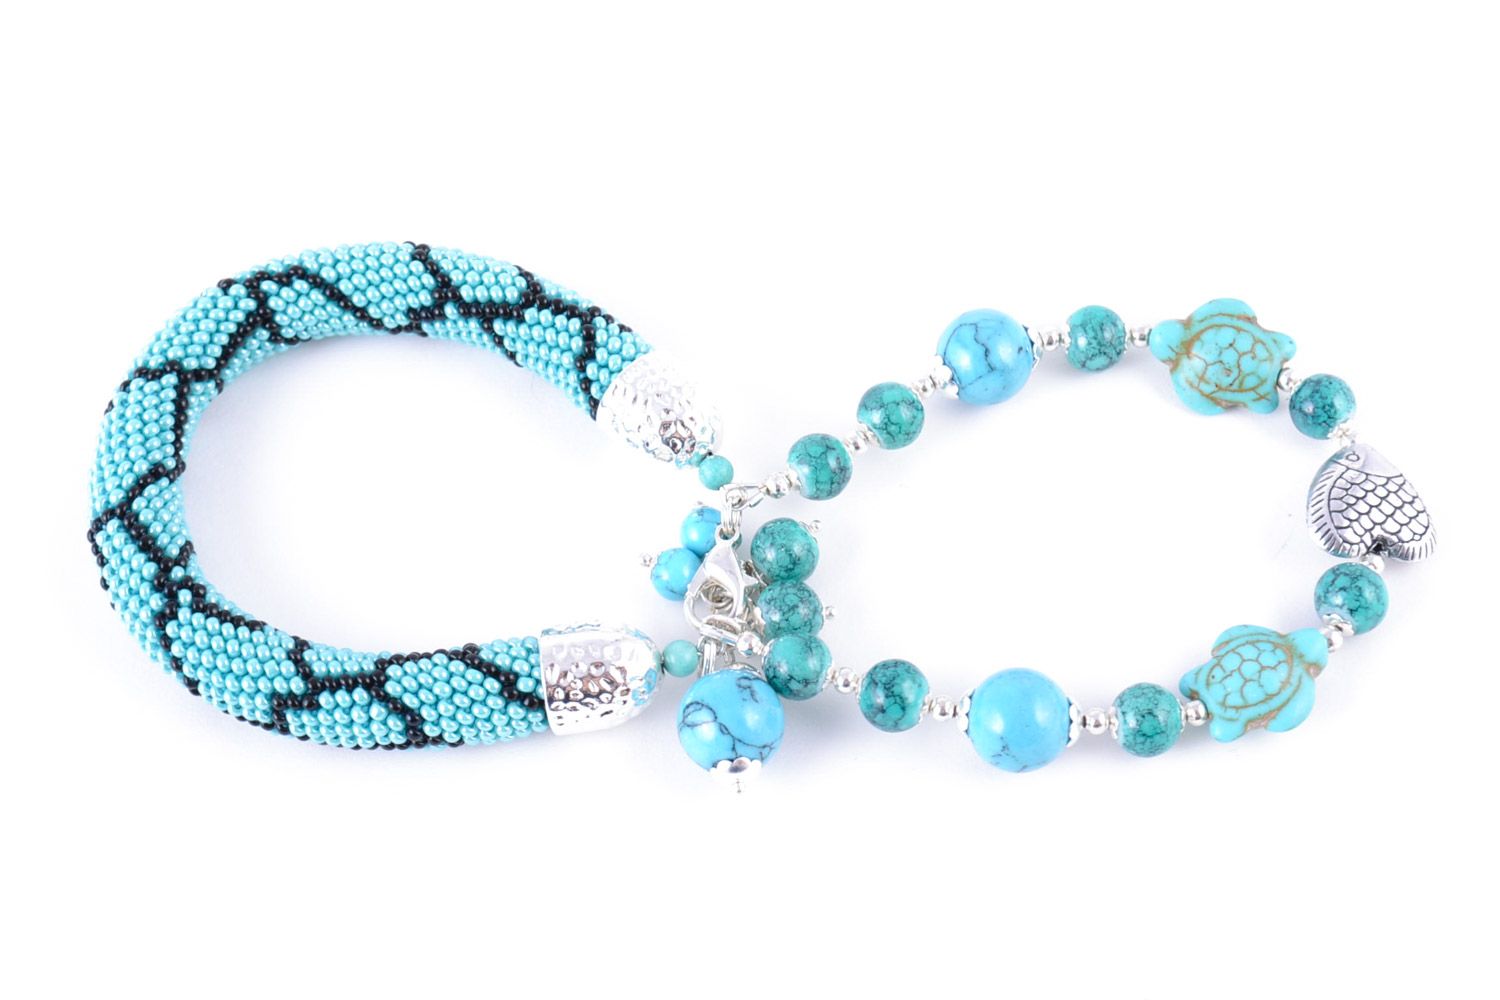 Handmade beaded cord necklace woven of seed beads and turquoise stone with metal fittings photo 3